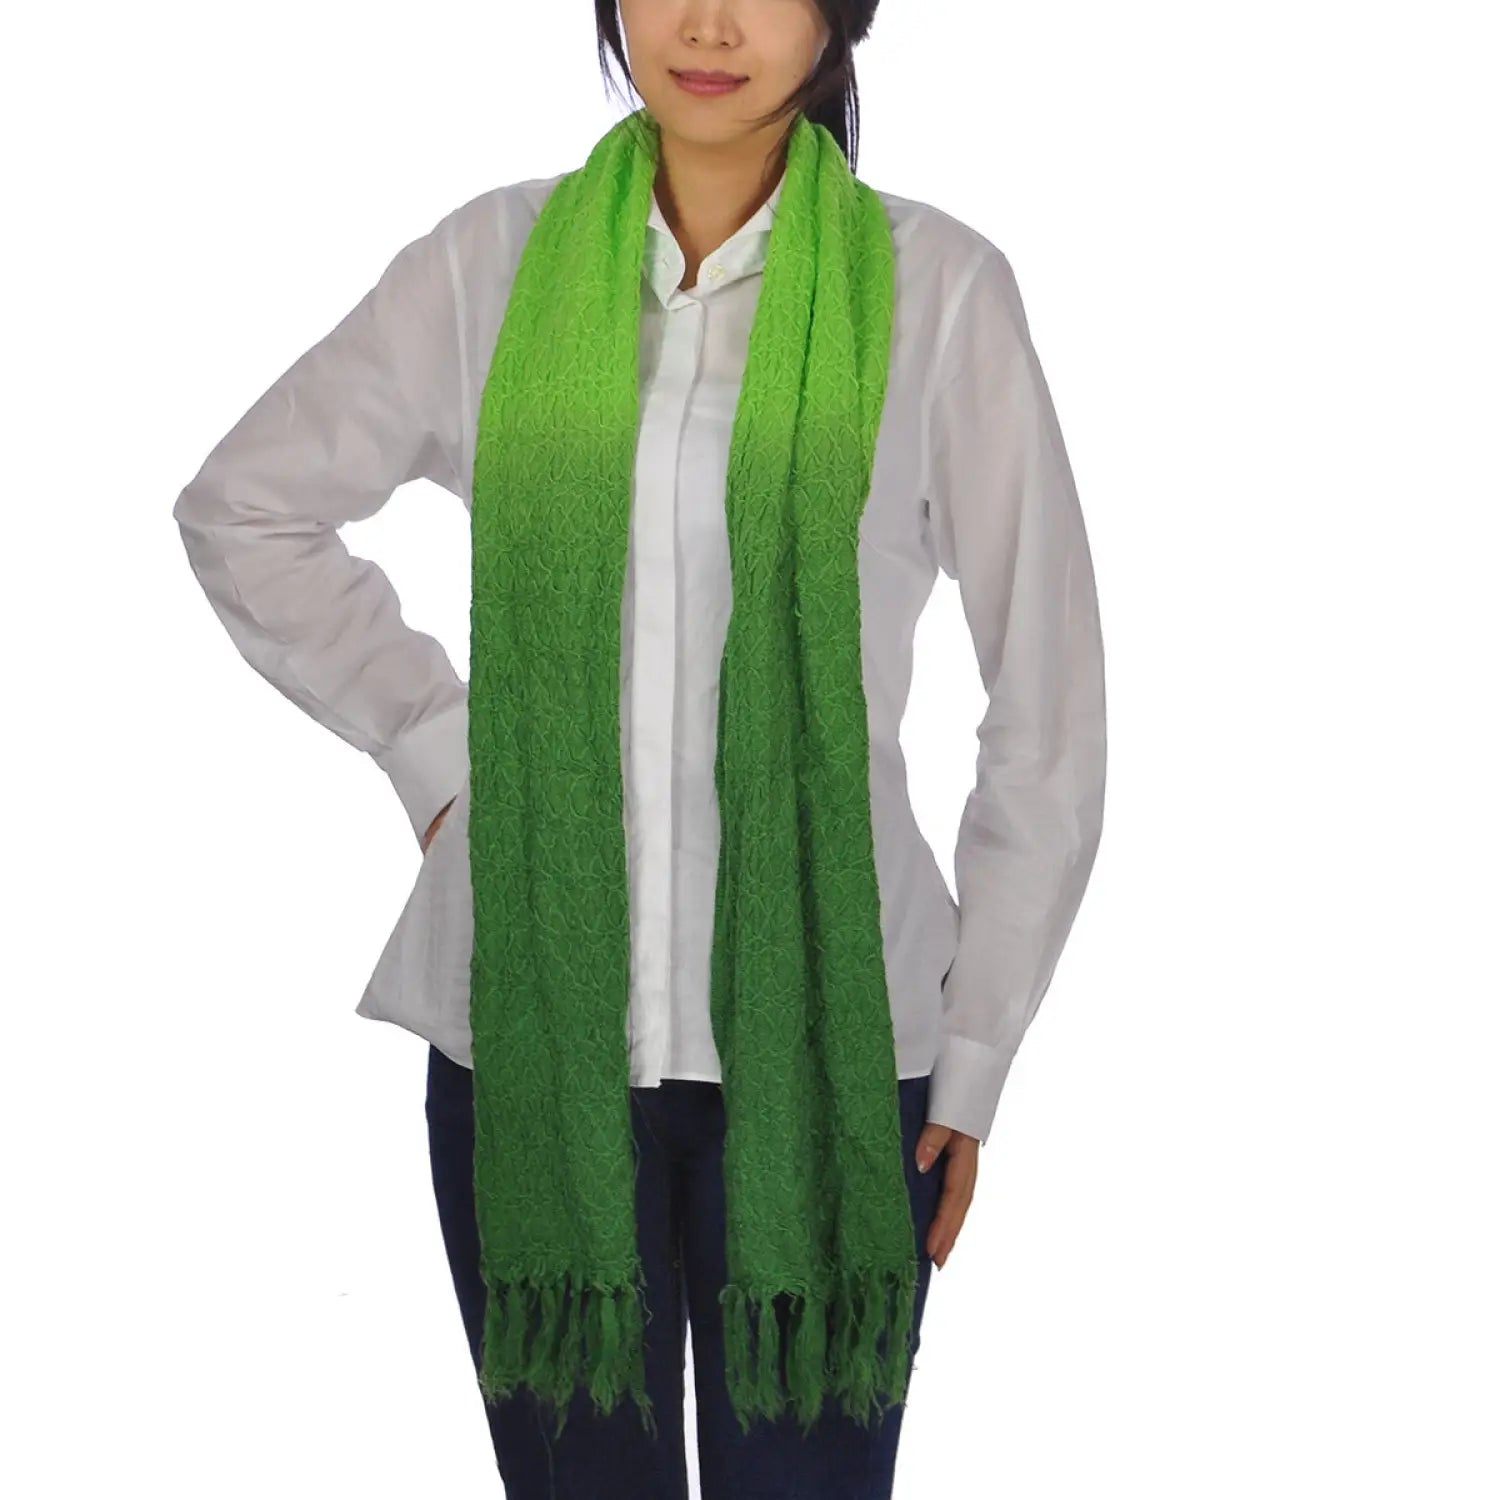 Stylish woman in green scarf from Sophisticated Embroidered Dip Dye Tasselled Soft Scarf